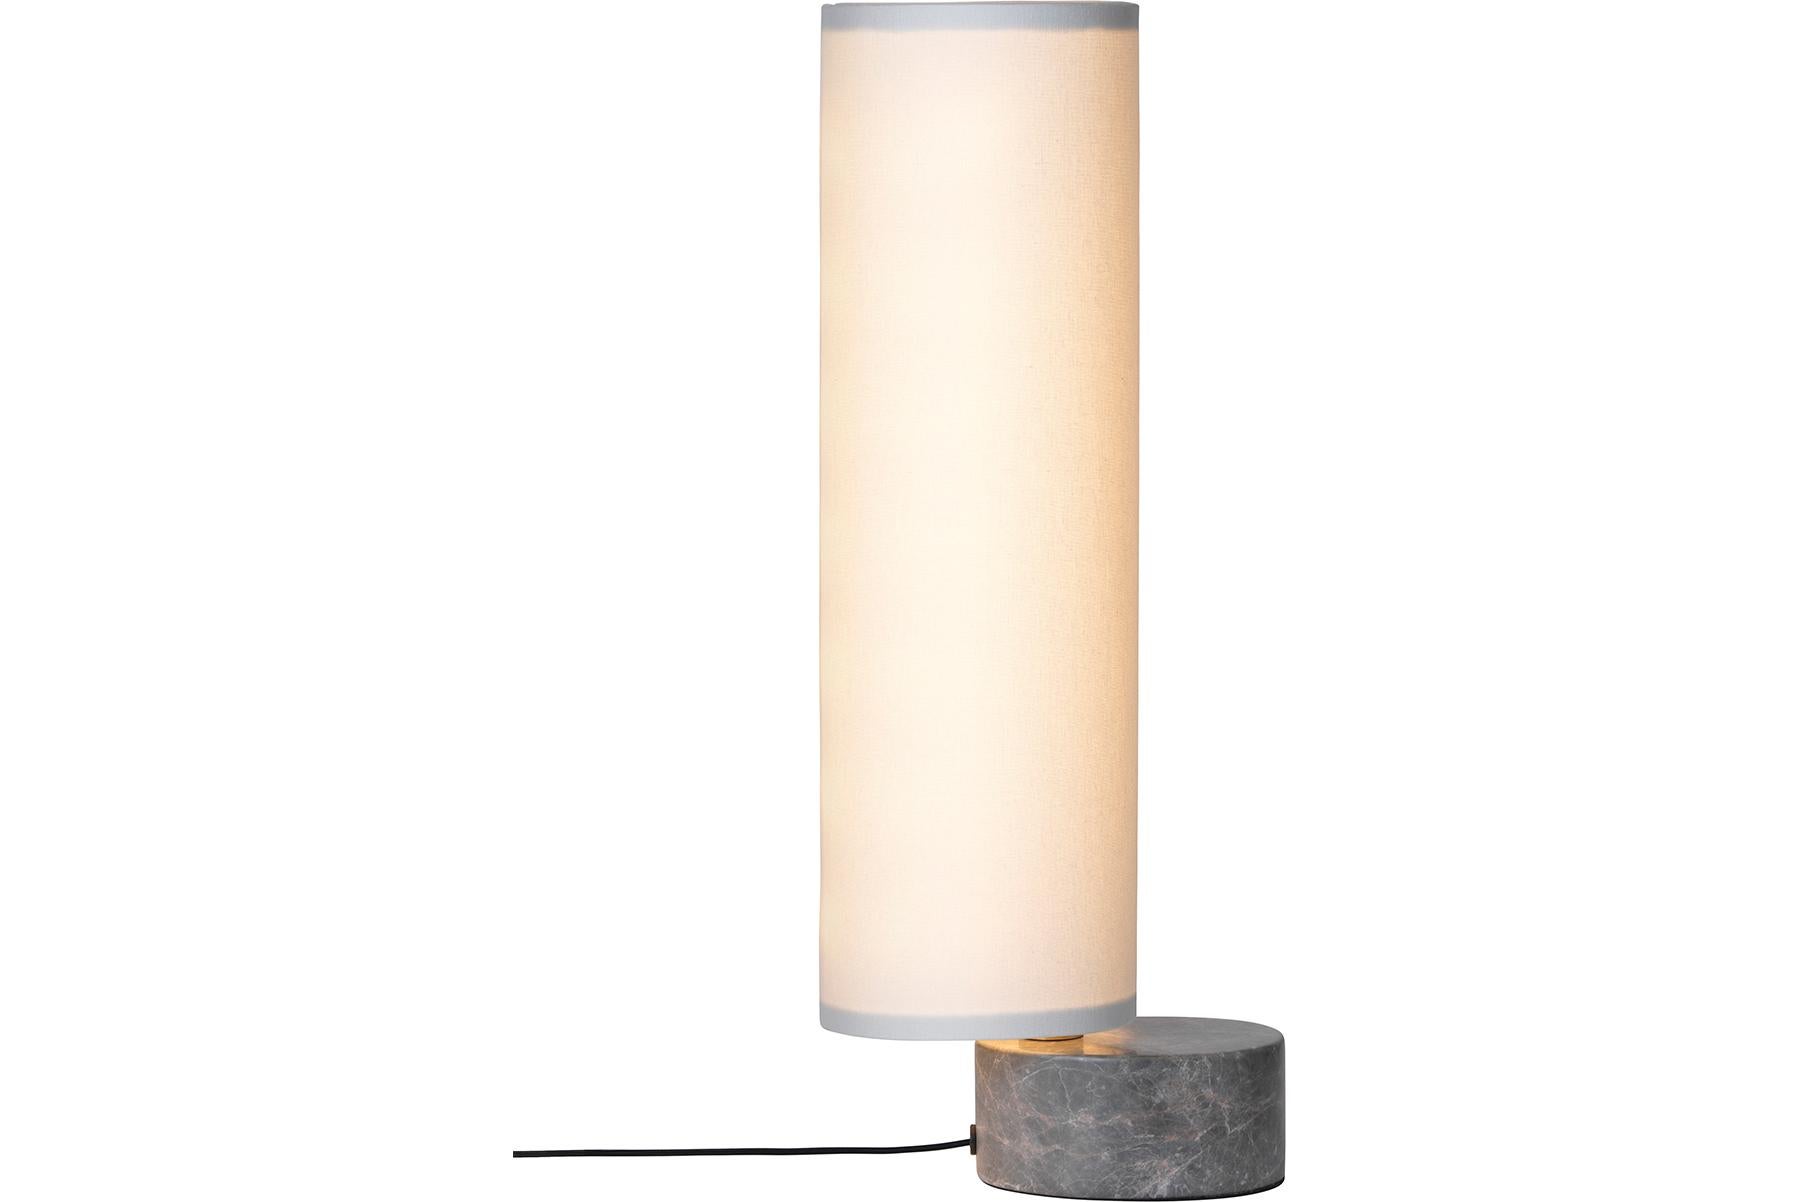 Playful, poetic and pared back, Space Copenhagen’s design team have reimagined the traditional lantern with the calming and characterful Unbound Table Lamp.

With the teardrop-shaped marble base acting as an anchor, the white linen or natural